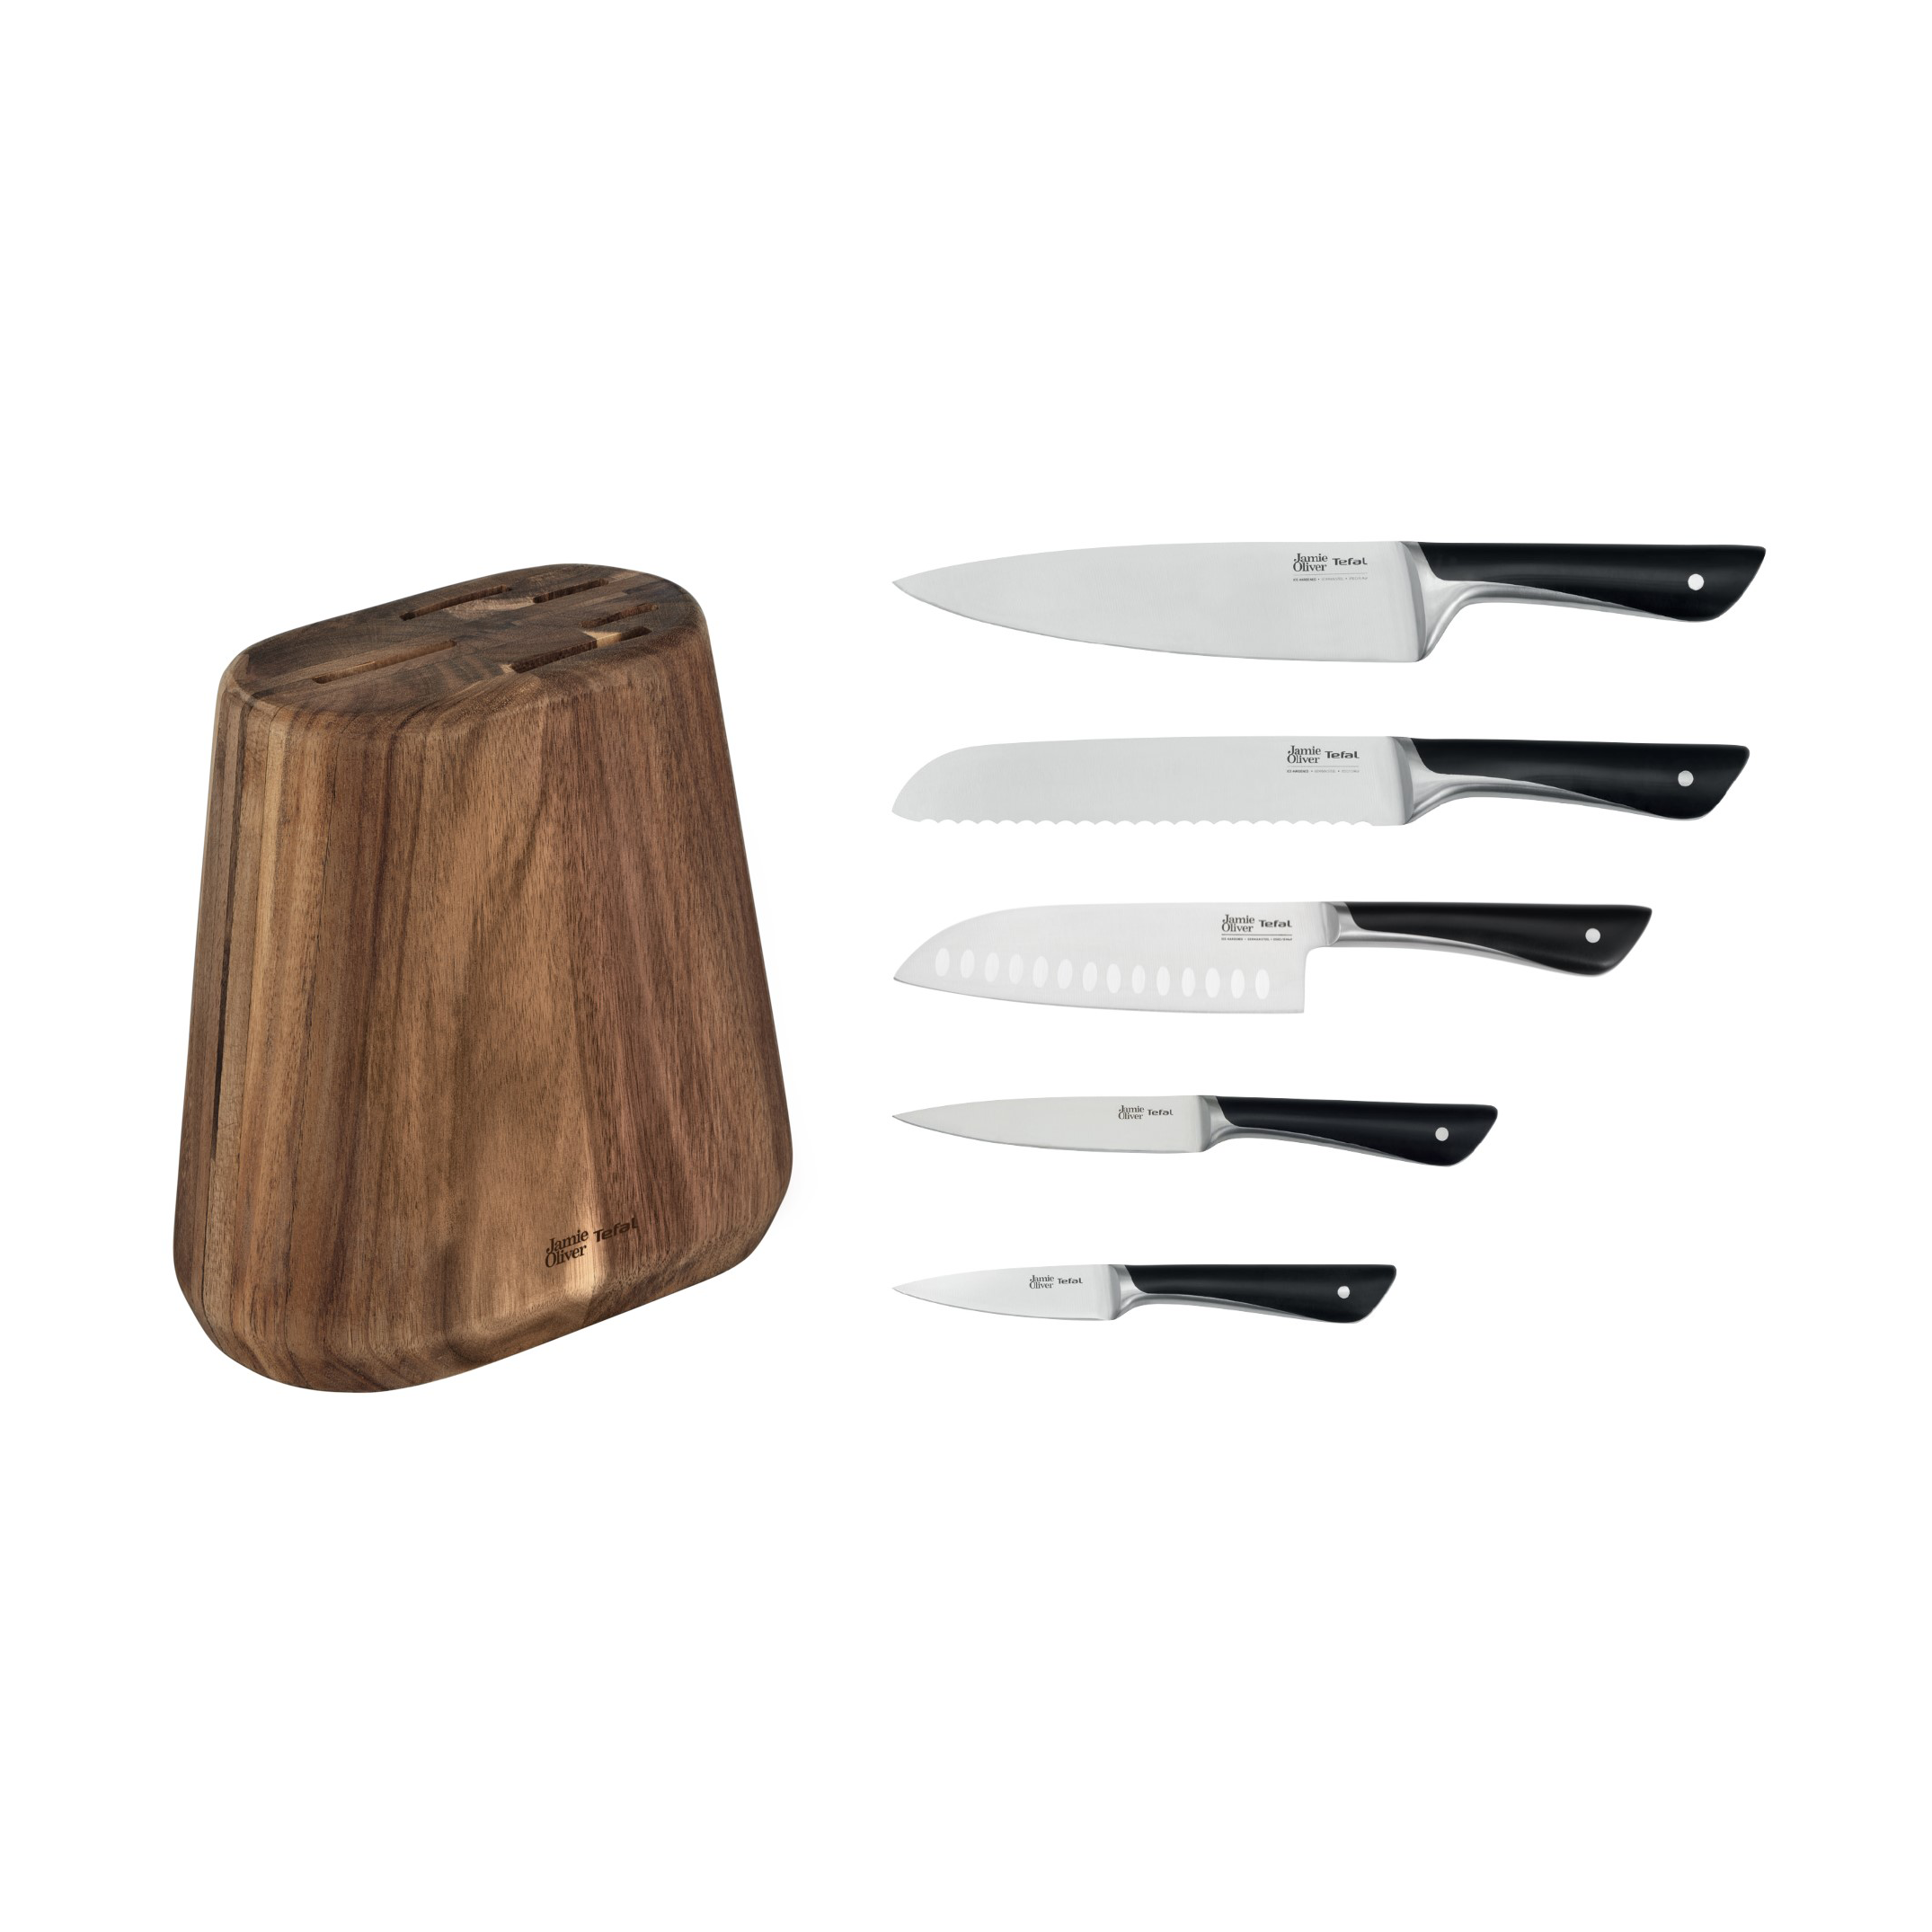 https://www.nordicnest.com/assets/blobs/tefal-jamie-oliver-knife-set-with-knife-block-6-pieces/587214-01_22_ProductImageExtra-e79e9cd78b.png